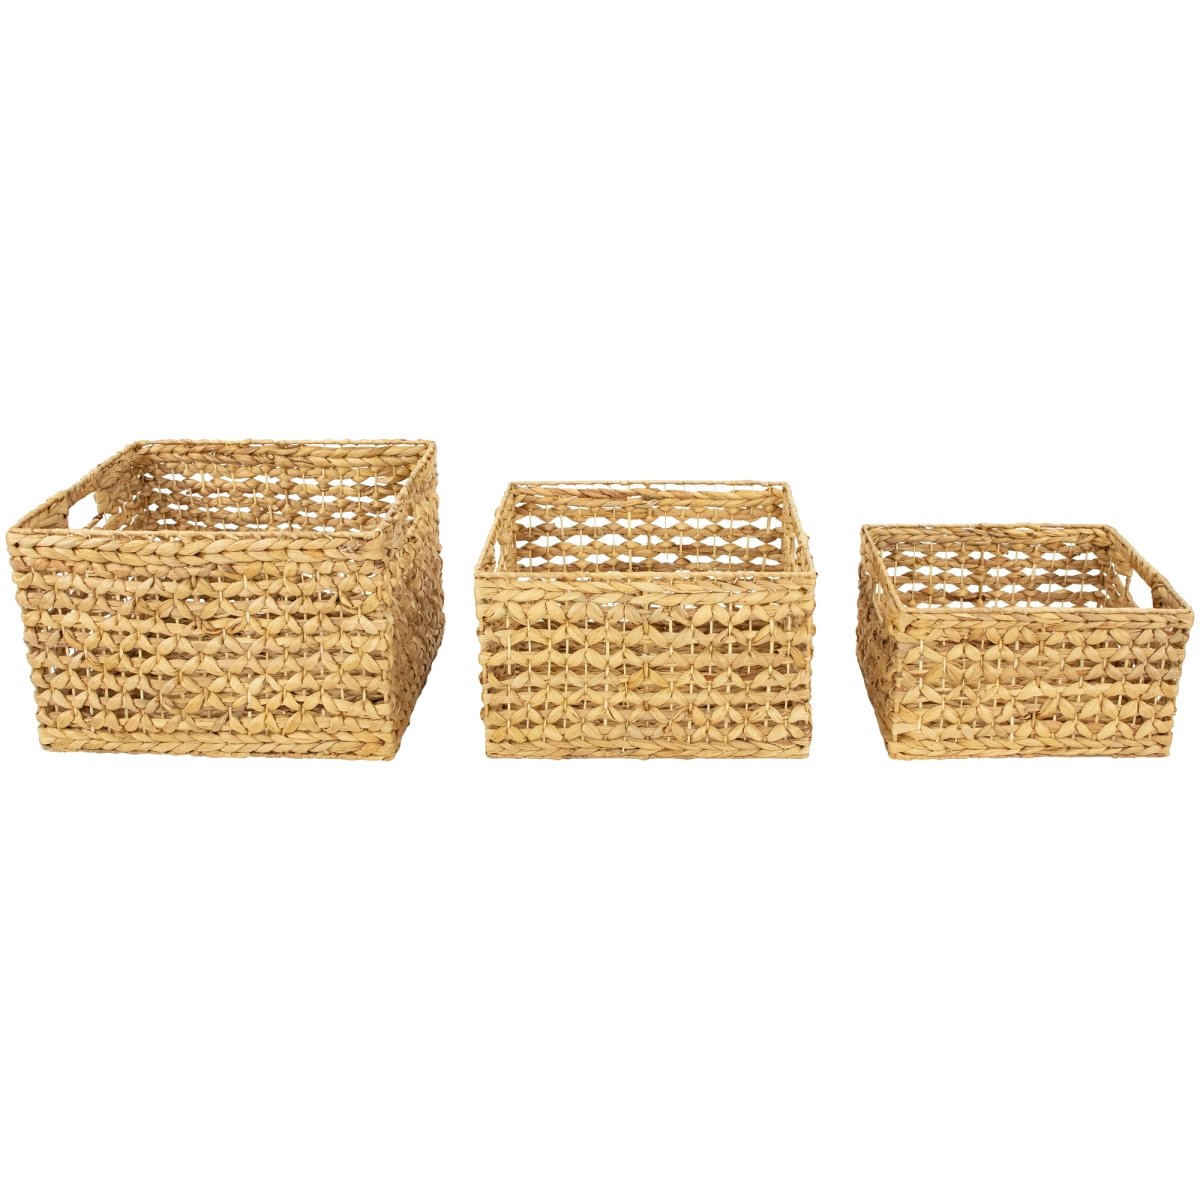 Picture of Northlight 35737397 17.75 in. Diamond Weave Rectangular Water Hyacinth Baskets with Handles - Set of 3